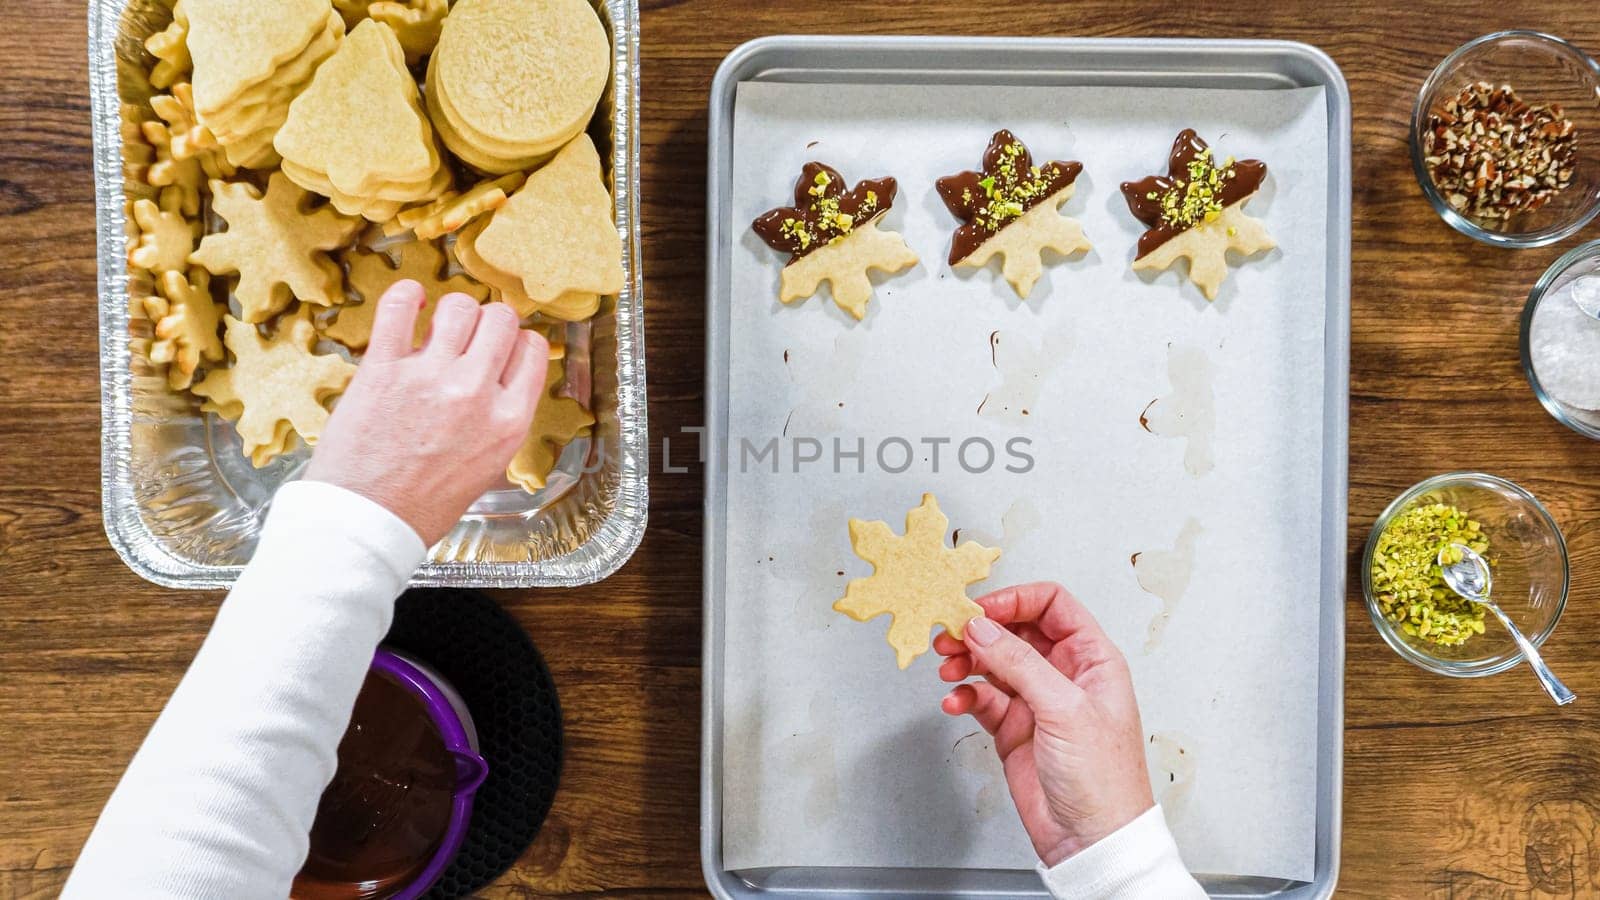 Flat lay. Creating snowflake-shaped cutout sugar cookies, dipped in chocolate, and adorned with different toppings.